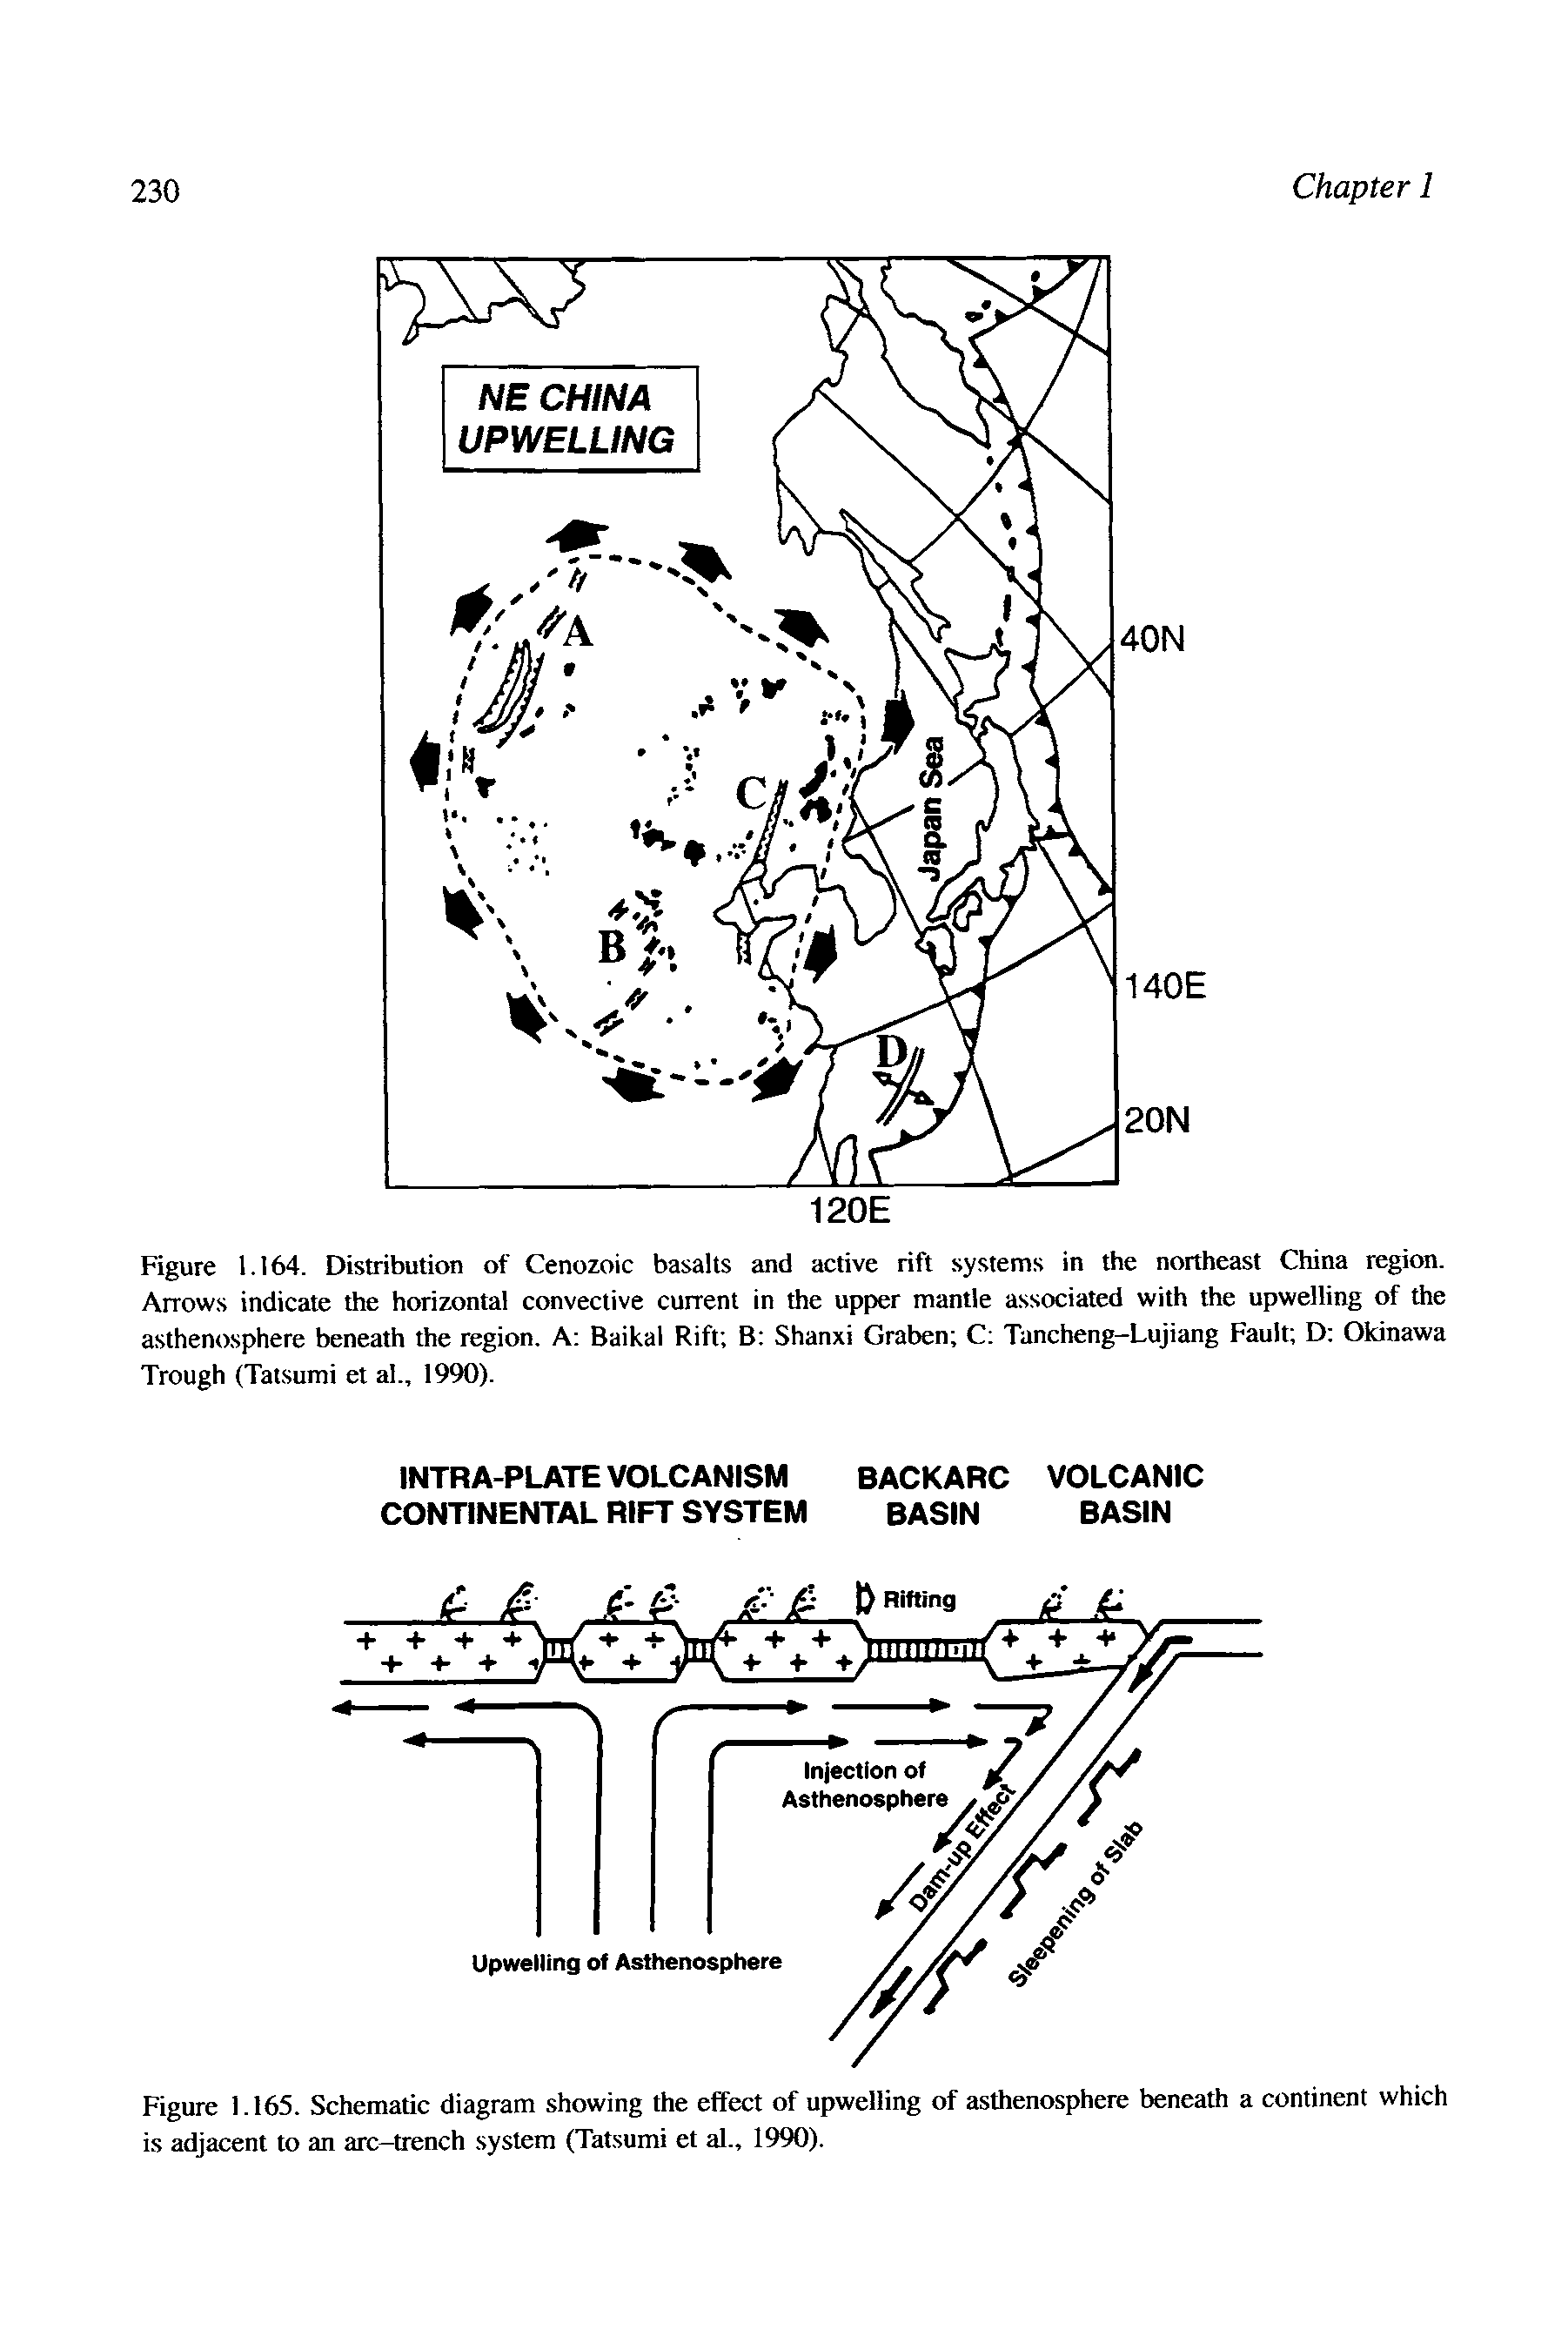 Figure 1.165. Schematic diagram showing the effect of upwelling of asthenosphere beneath a continent which is adjacent to an arc-trench. system (Tatsumi et al., 1990).